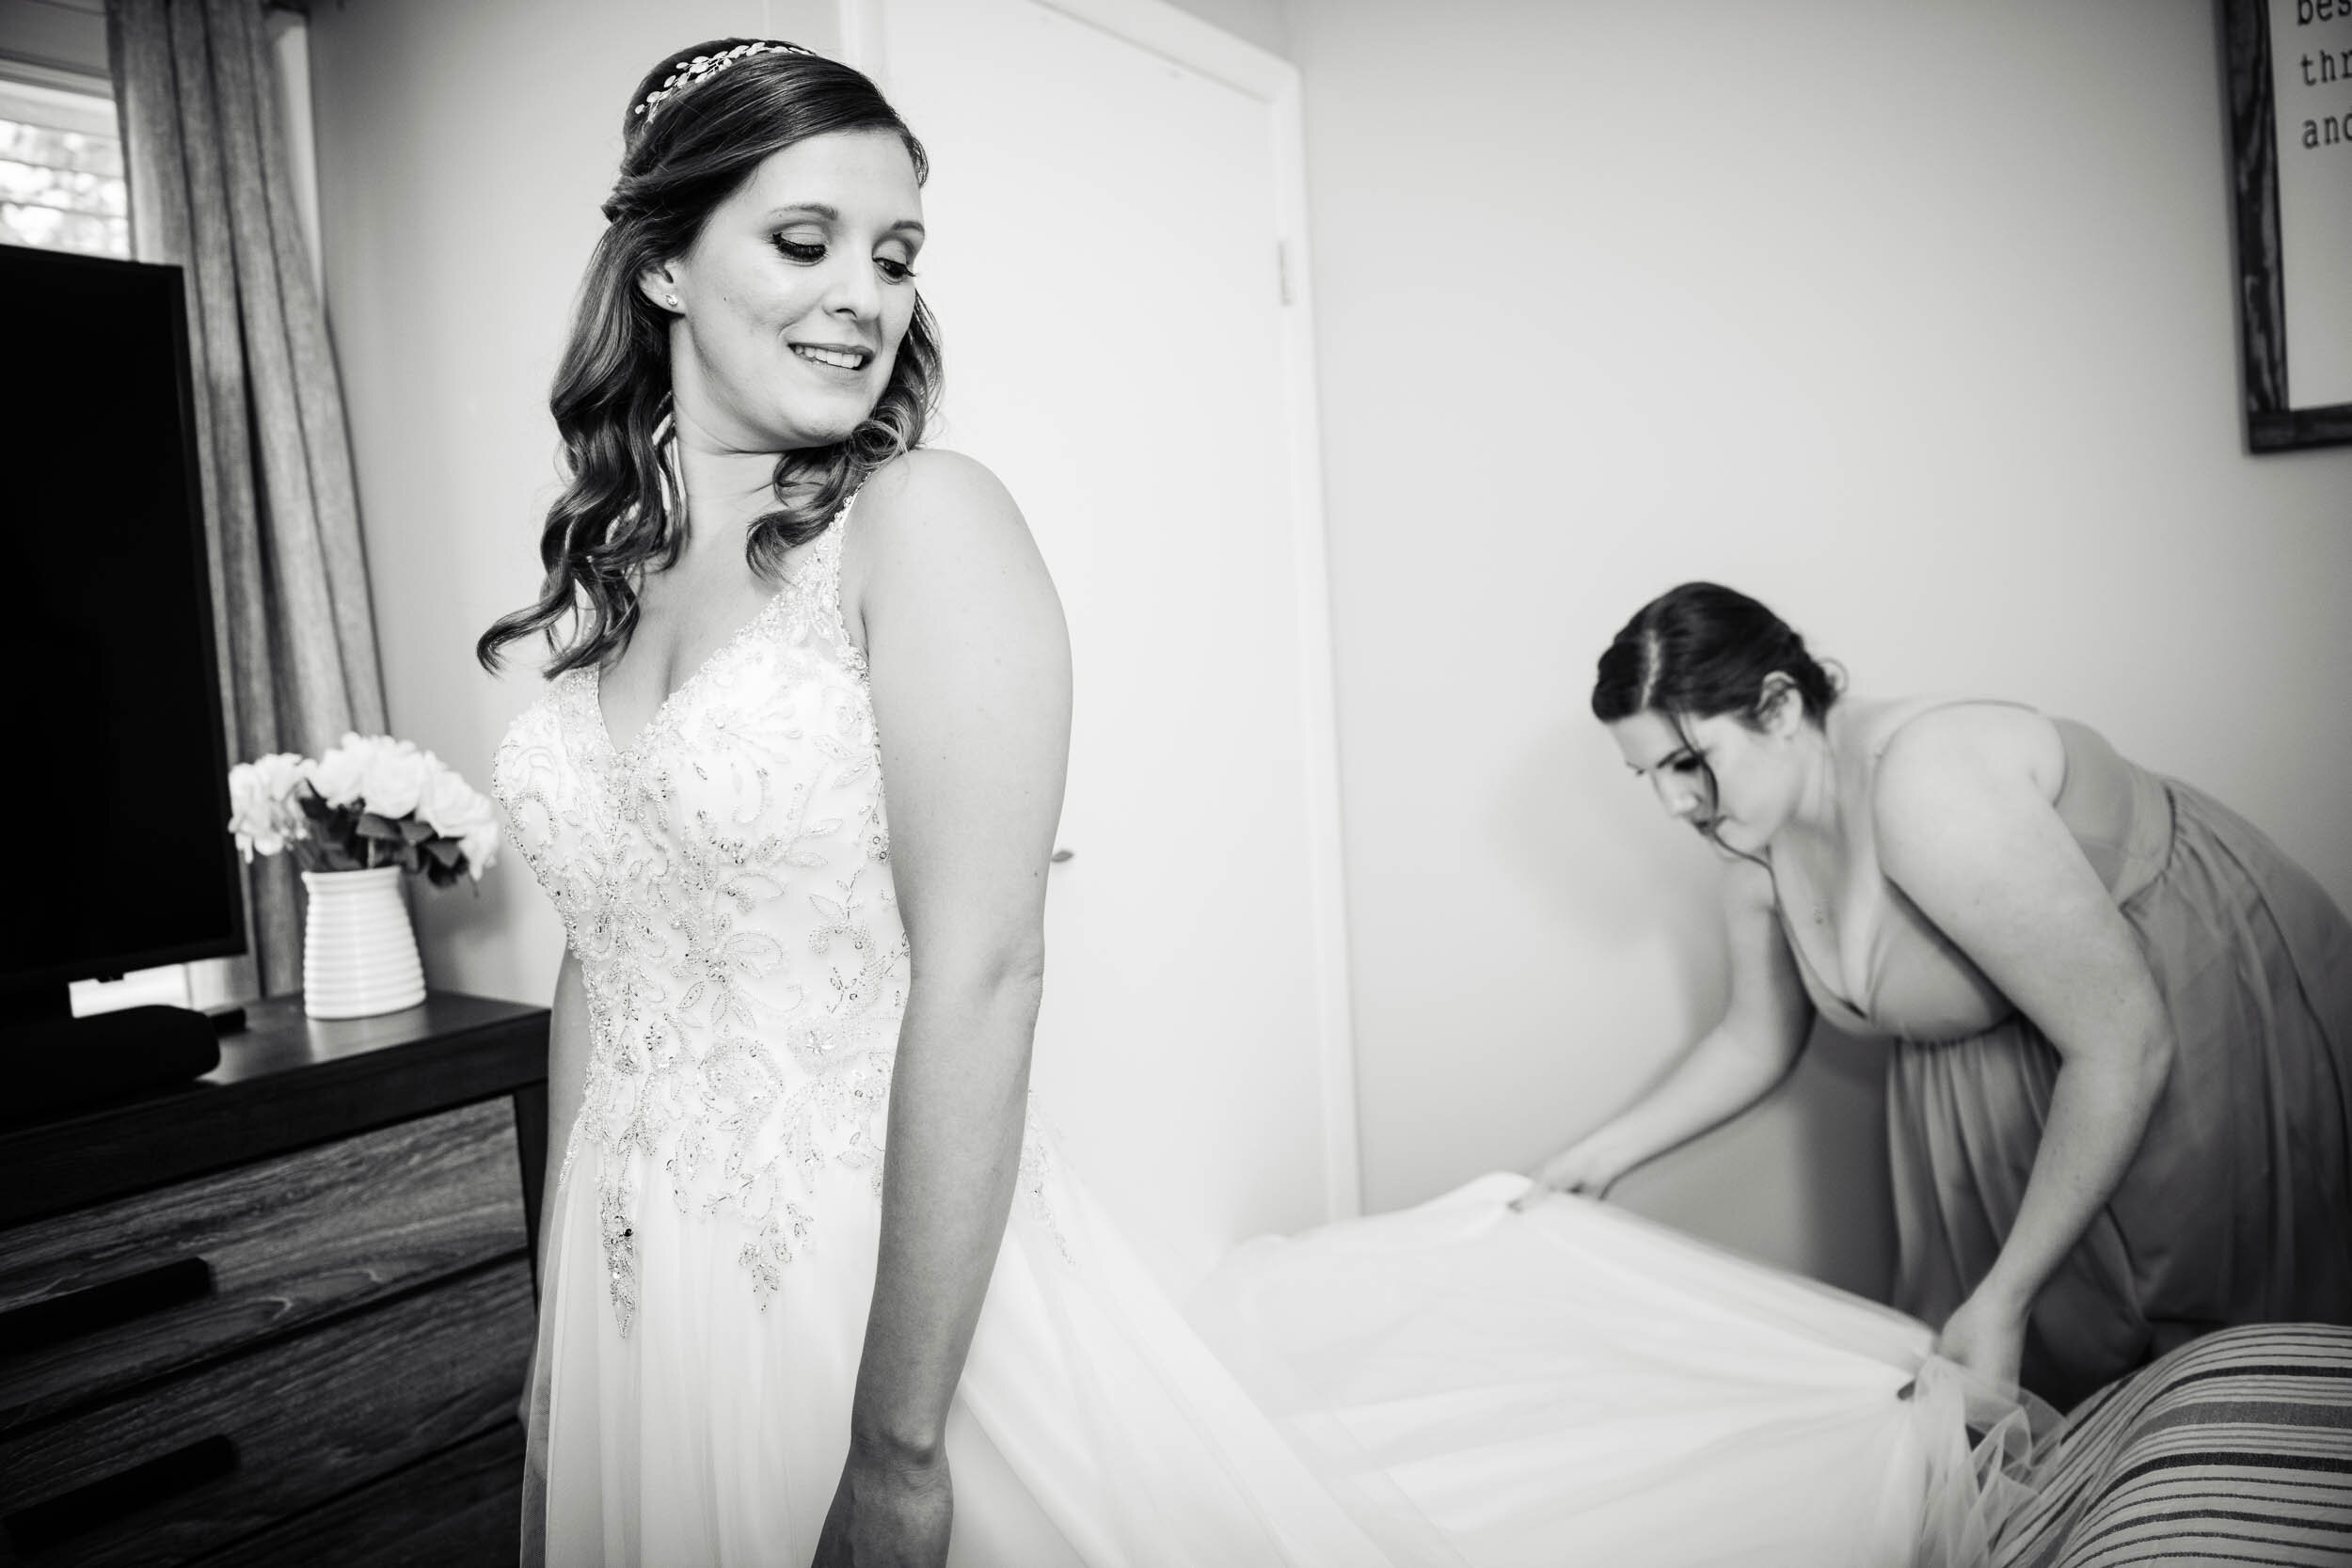 Bride and maid of honor getting ready on the wedding day:  Chicago backyard wedding photographed by J. Brown Photography.